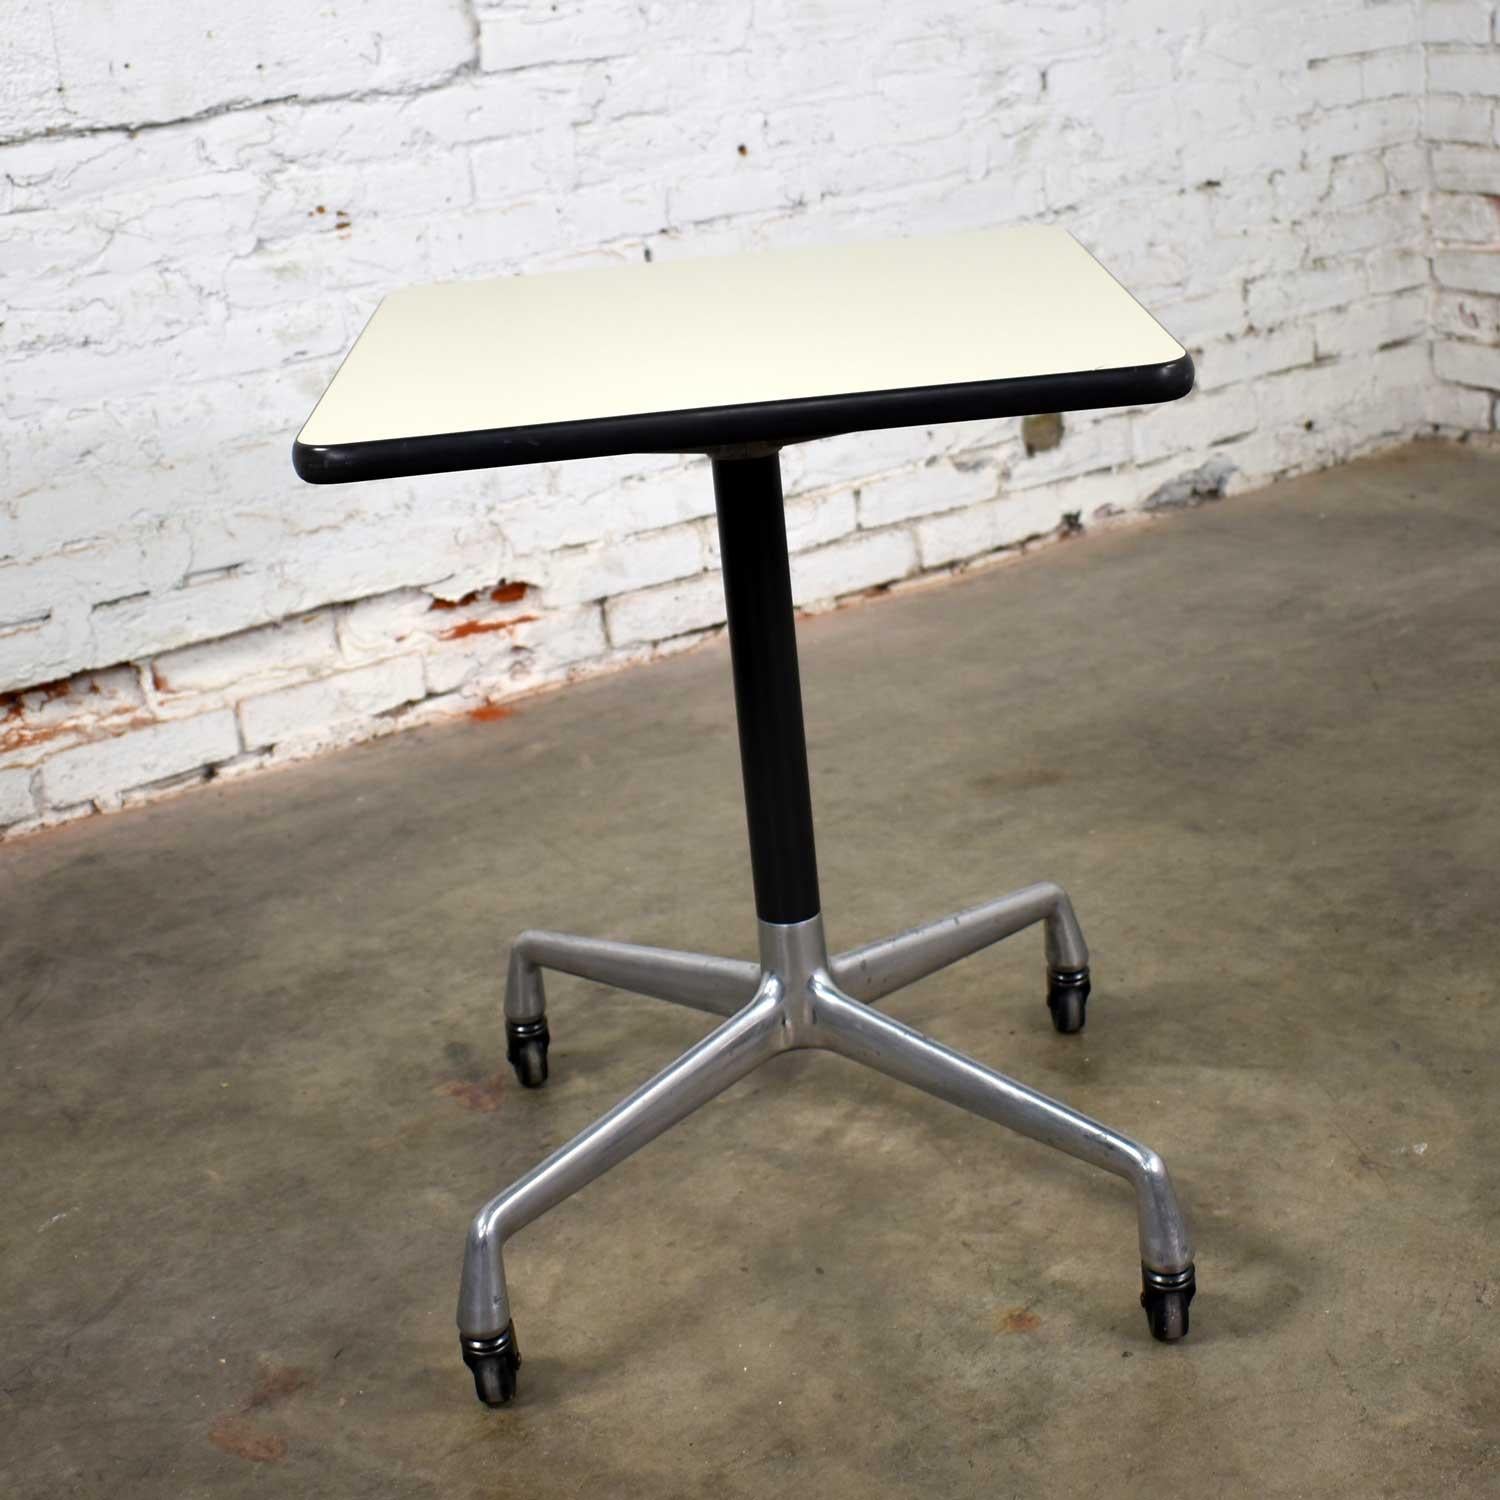 Wonderful square rolling side table designed by Charles and Ray Eames for Herman Miller. Comprised of white laminate top and universal base. In wonderful vintage condition with the normal signs of age. There is some darkening to the aluminum legs